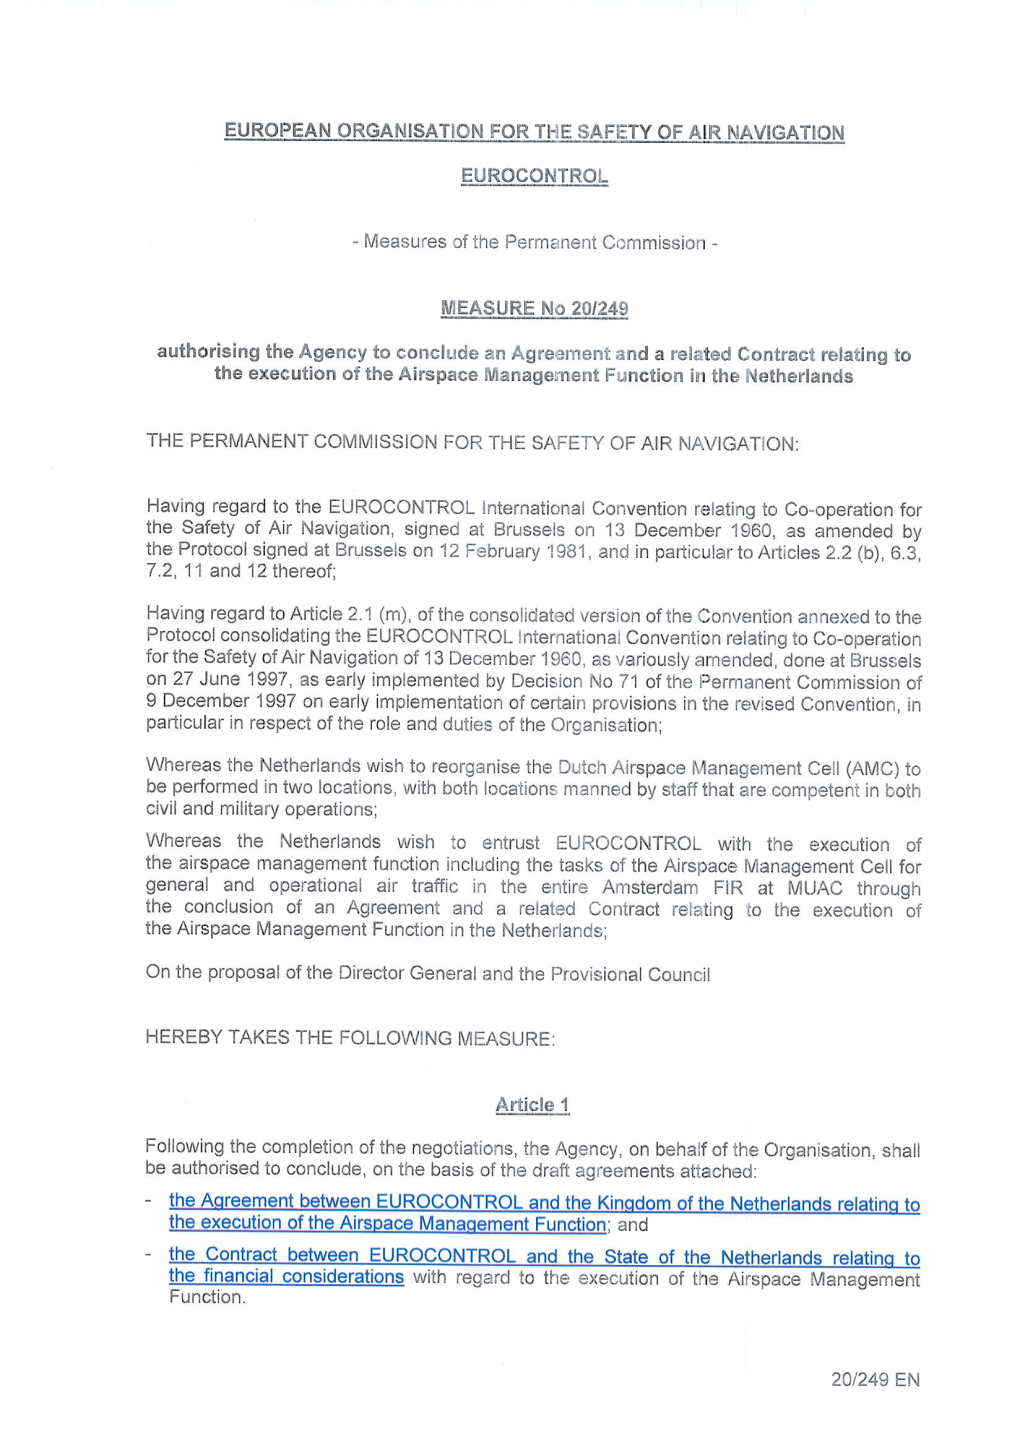 Agreement Between EUROCONTROL and the Kingdom of the Netherlands Relating to the Execution of the Airspace Management Function” Dated XX.XX.XXXX;